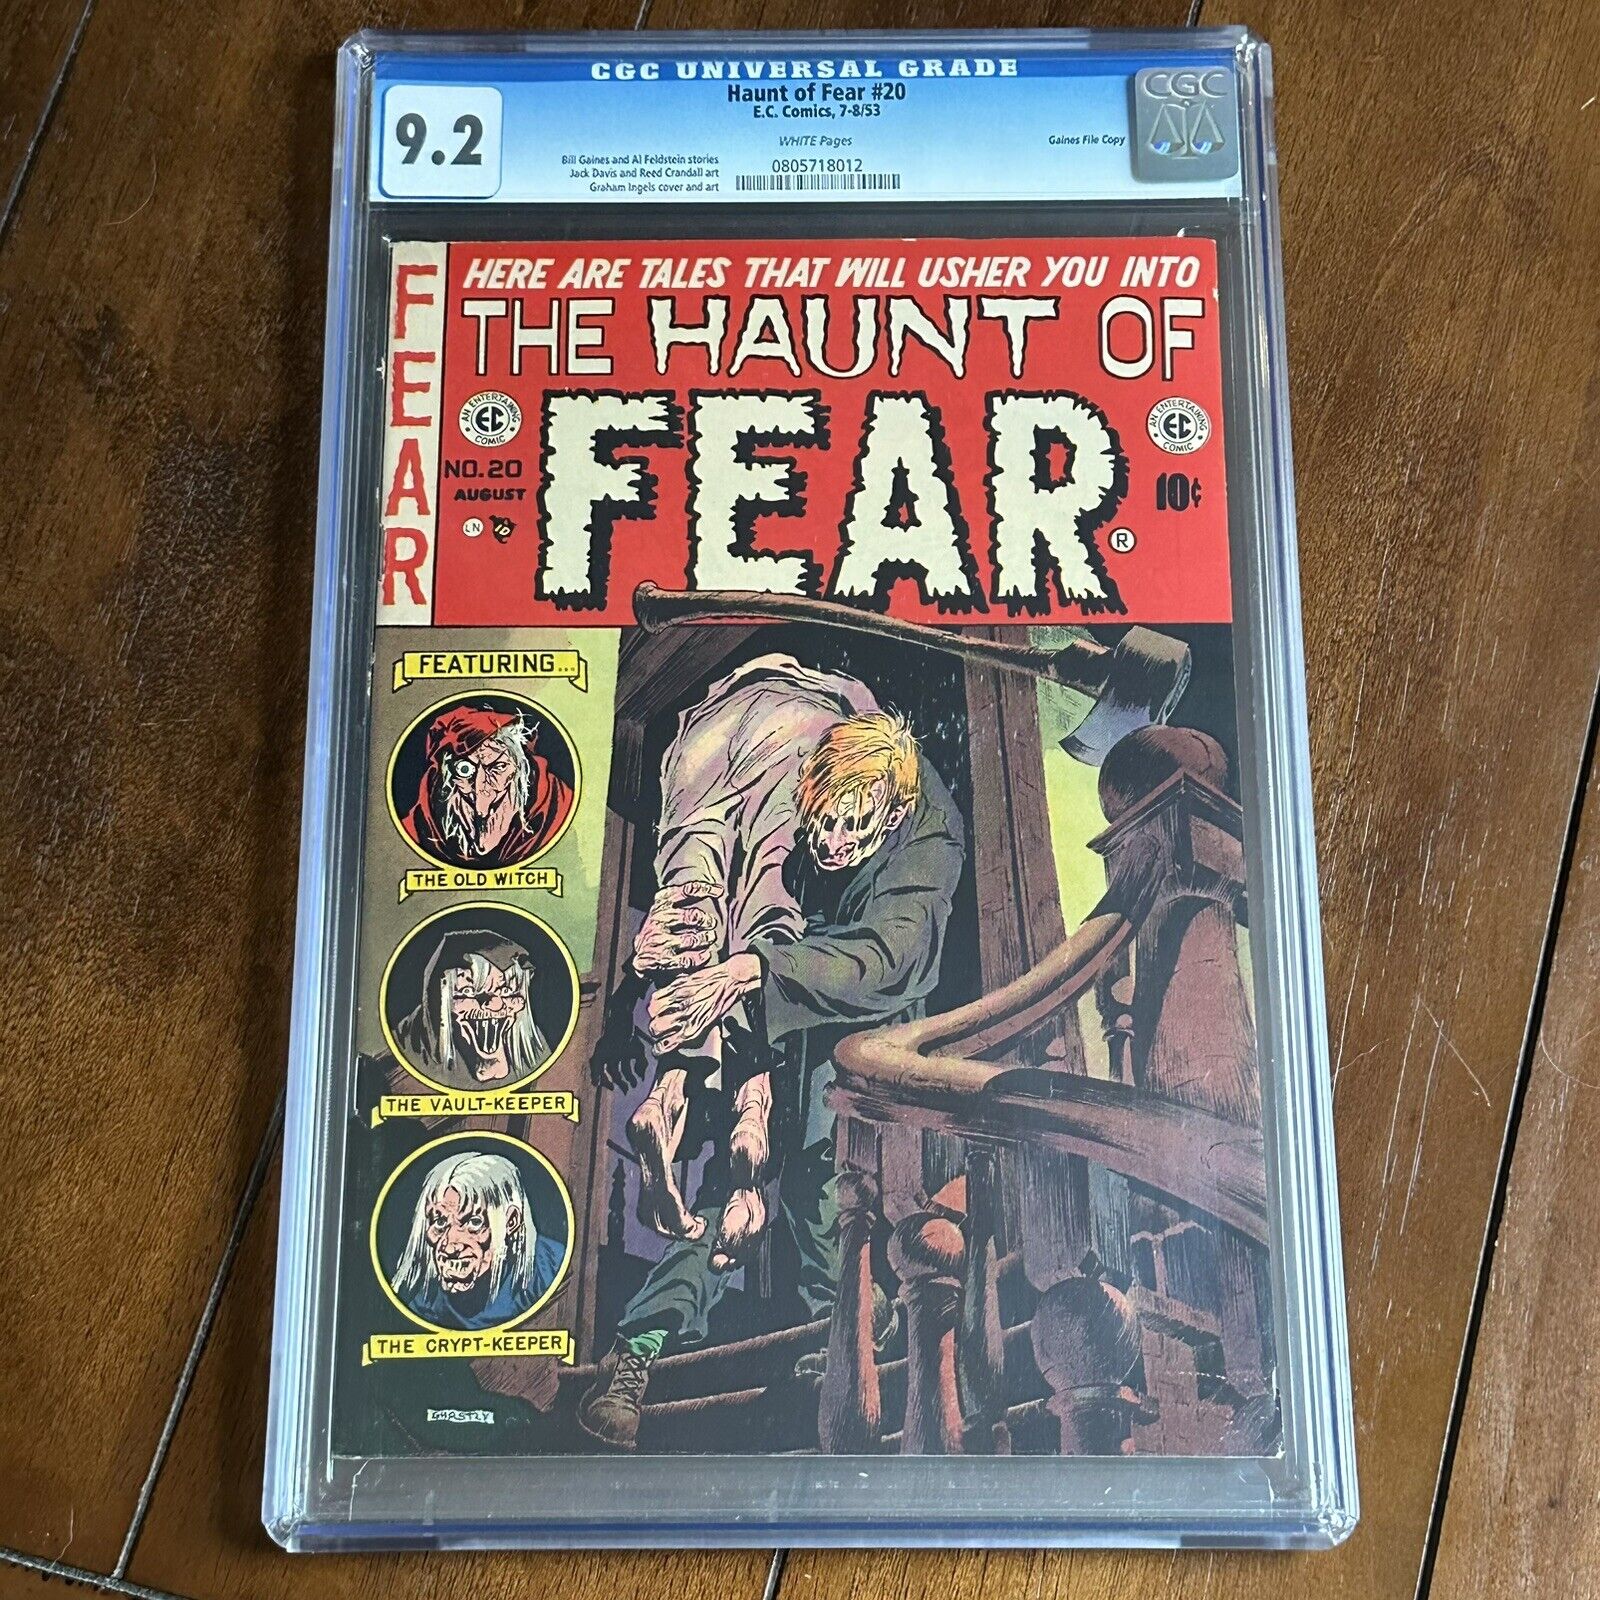 Haunt of Fear #20 (1953) - Gaines File Copy - CGC 9.2 - White Pages